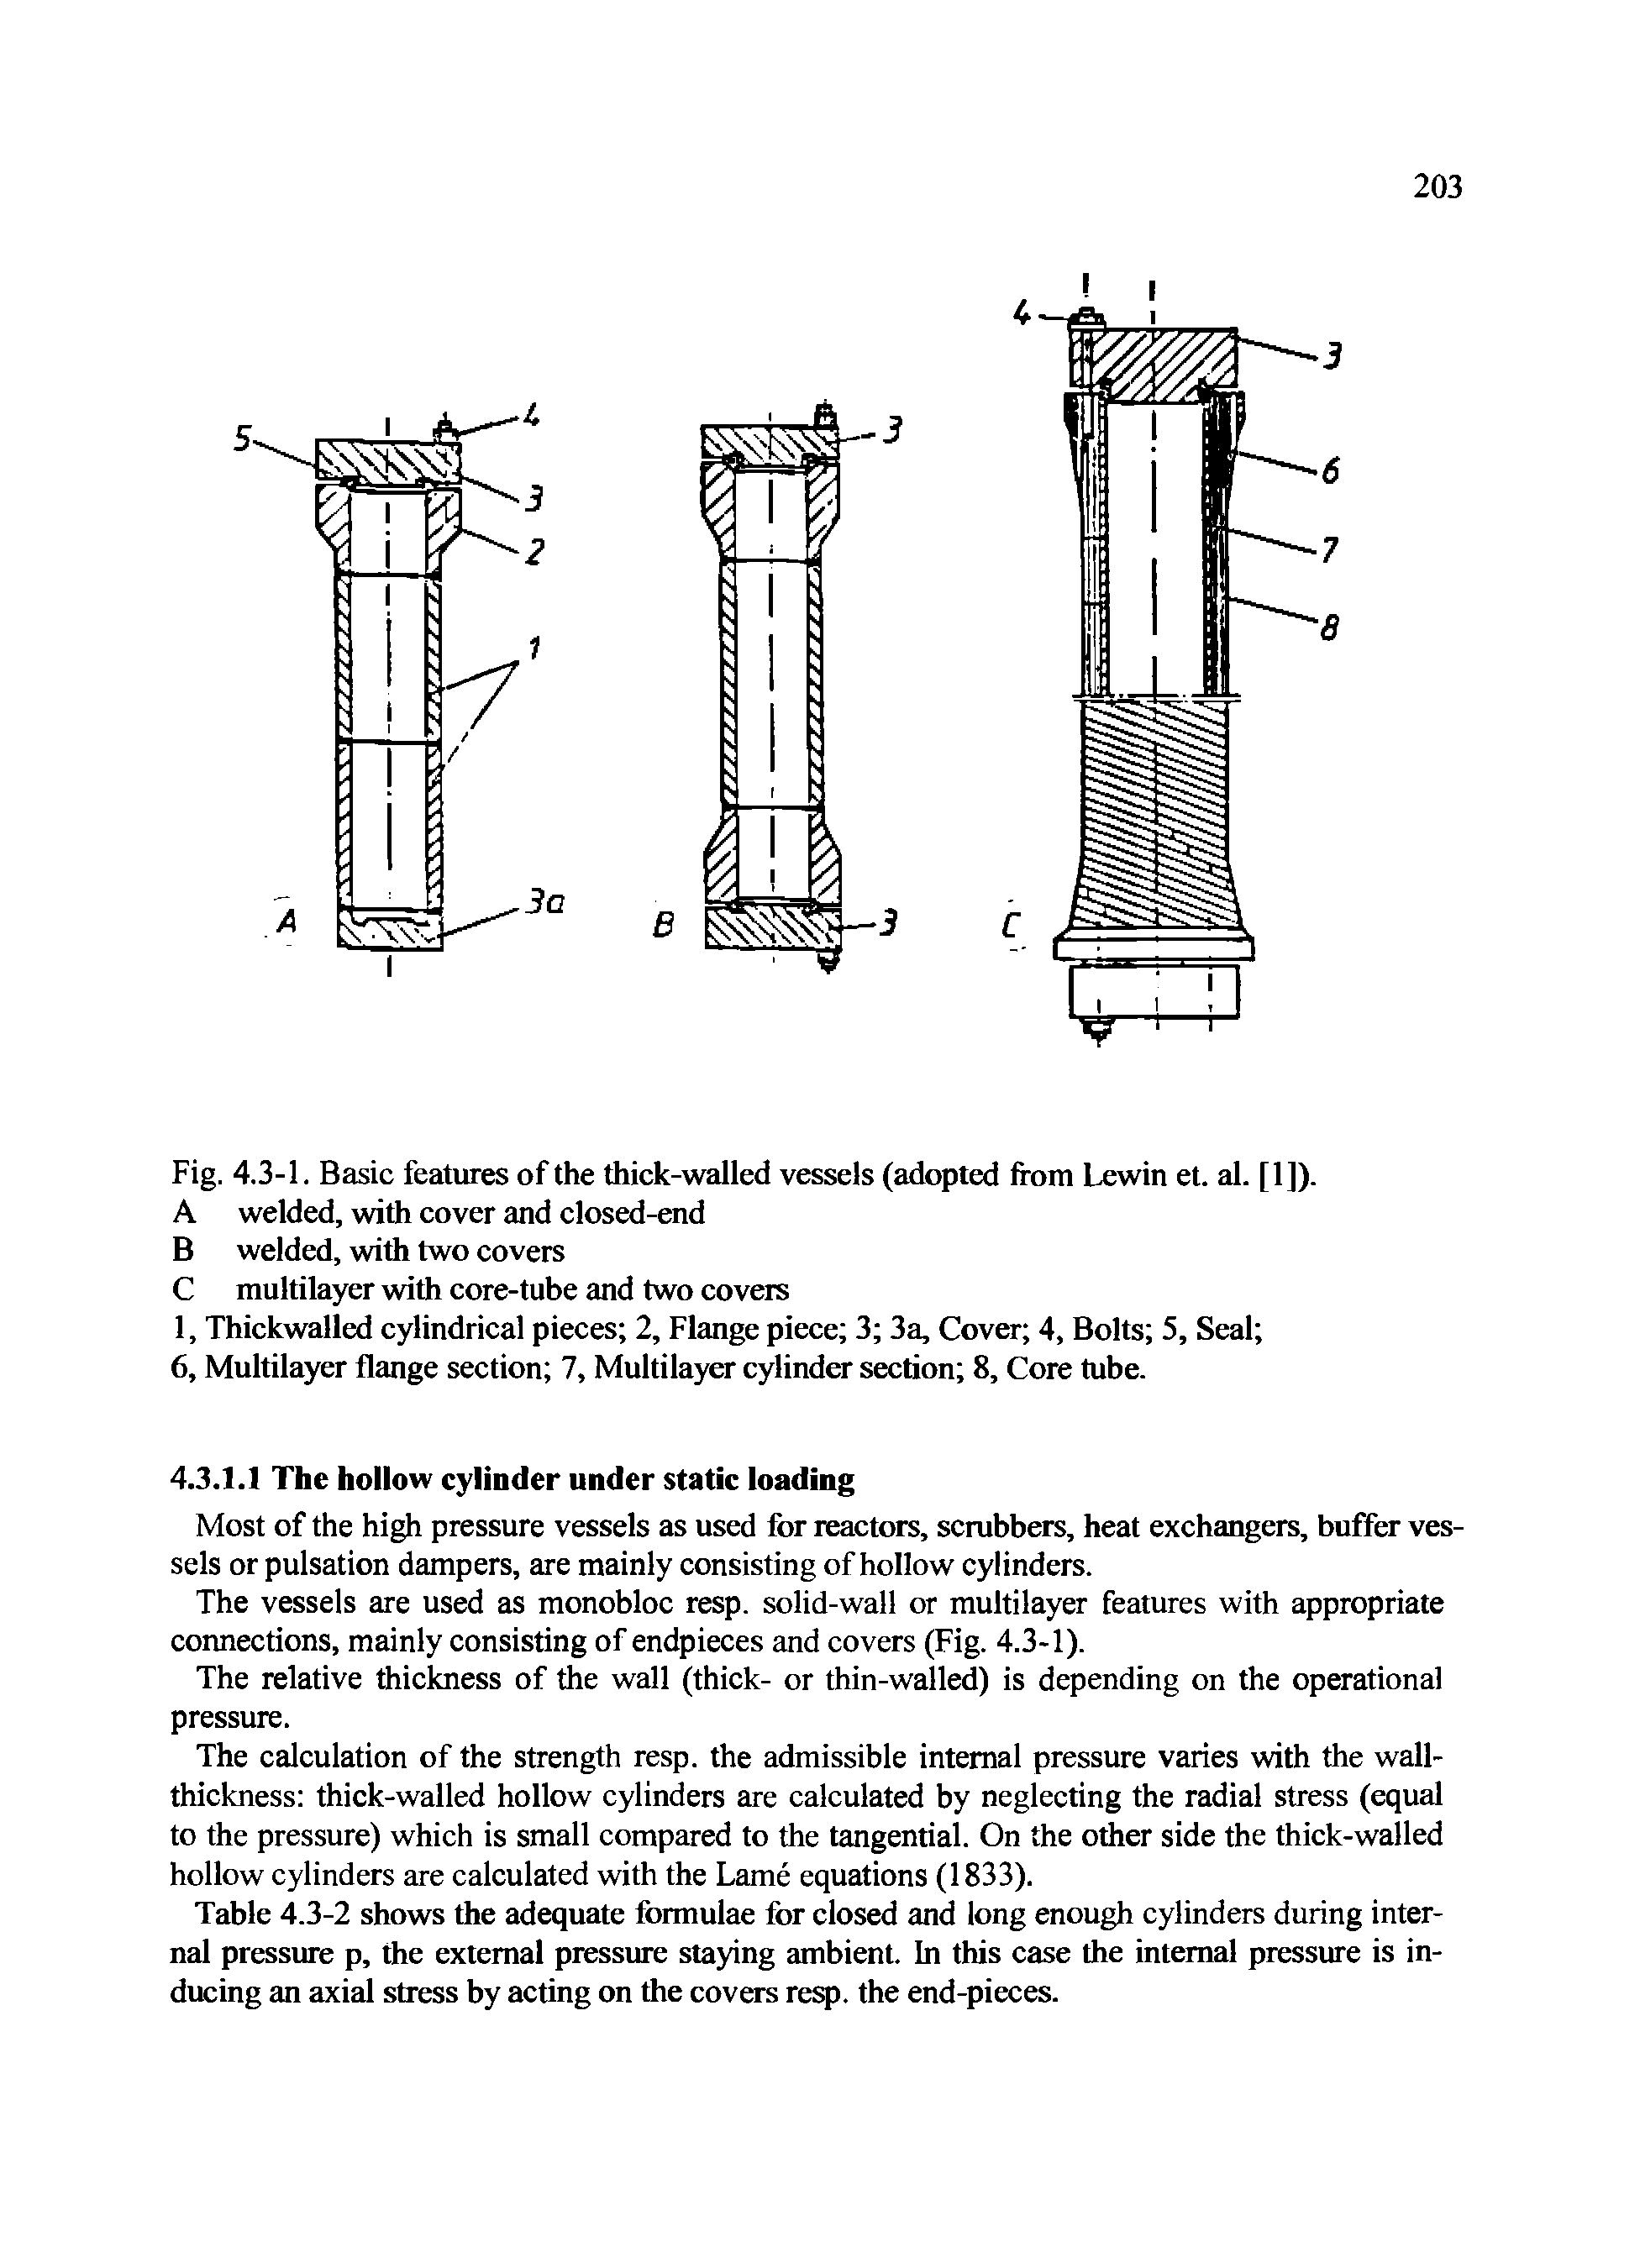 Fig. 4.3-1. Basic features of the thick-walled vessels (adopted from Lewin et. al. [1]). A welded, with cover and closed-end B welded, with two covers...